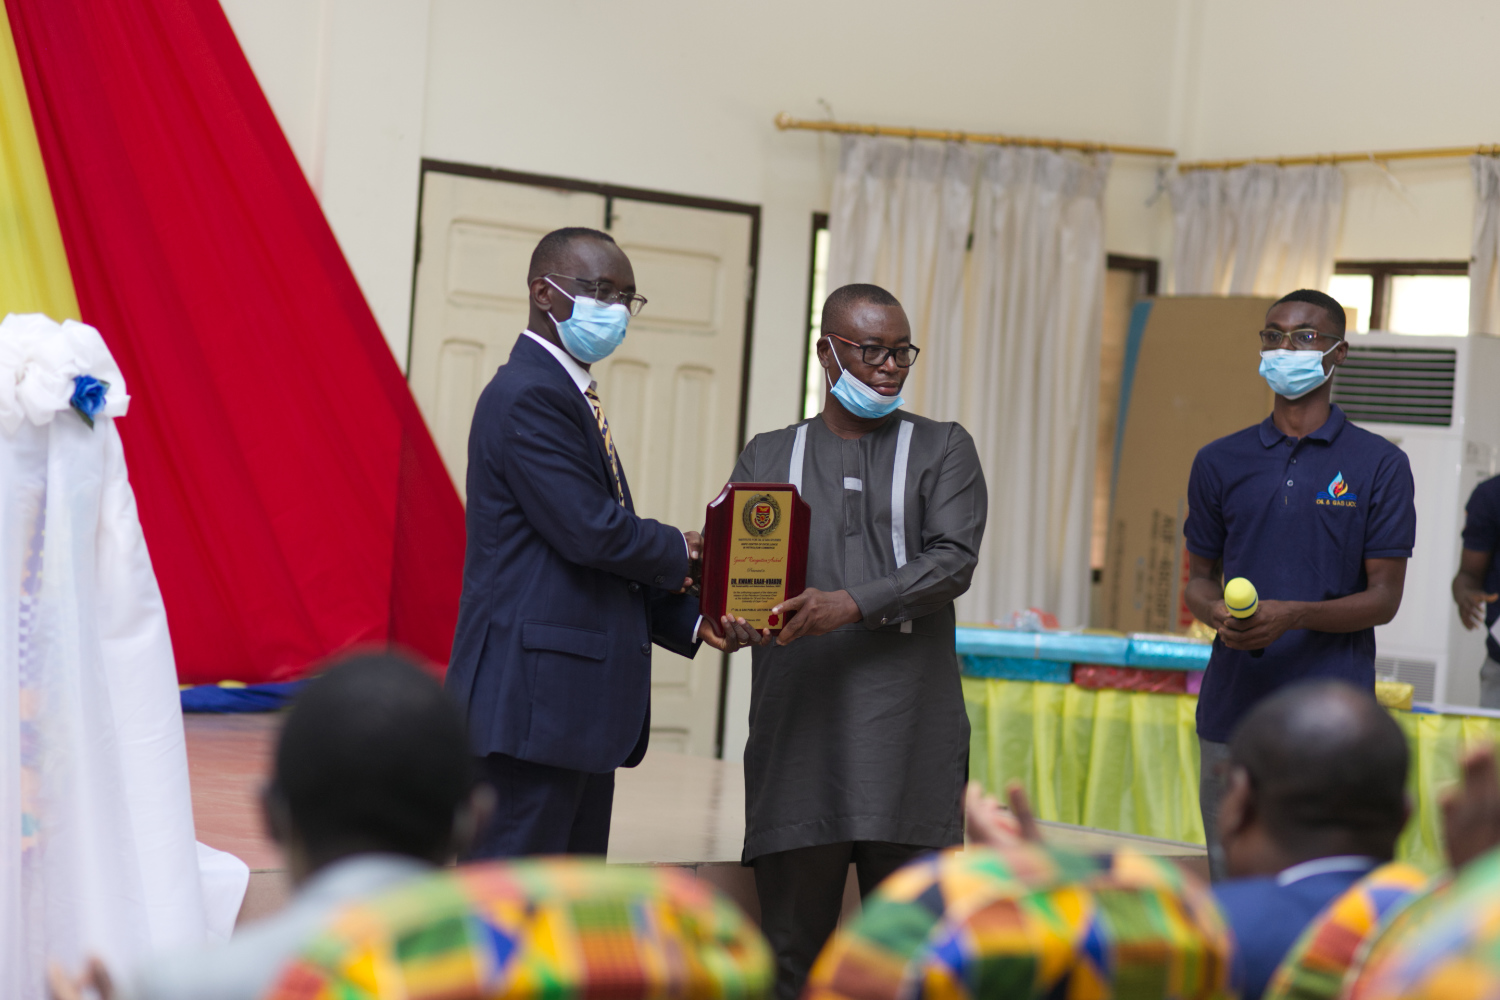   One of the post graduate students, Dr. Kwame Baah-Nuakoh, receiving his award.